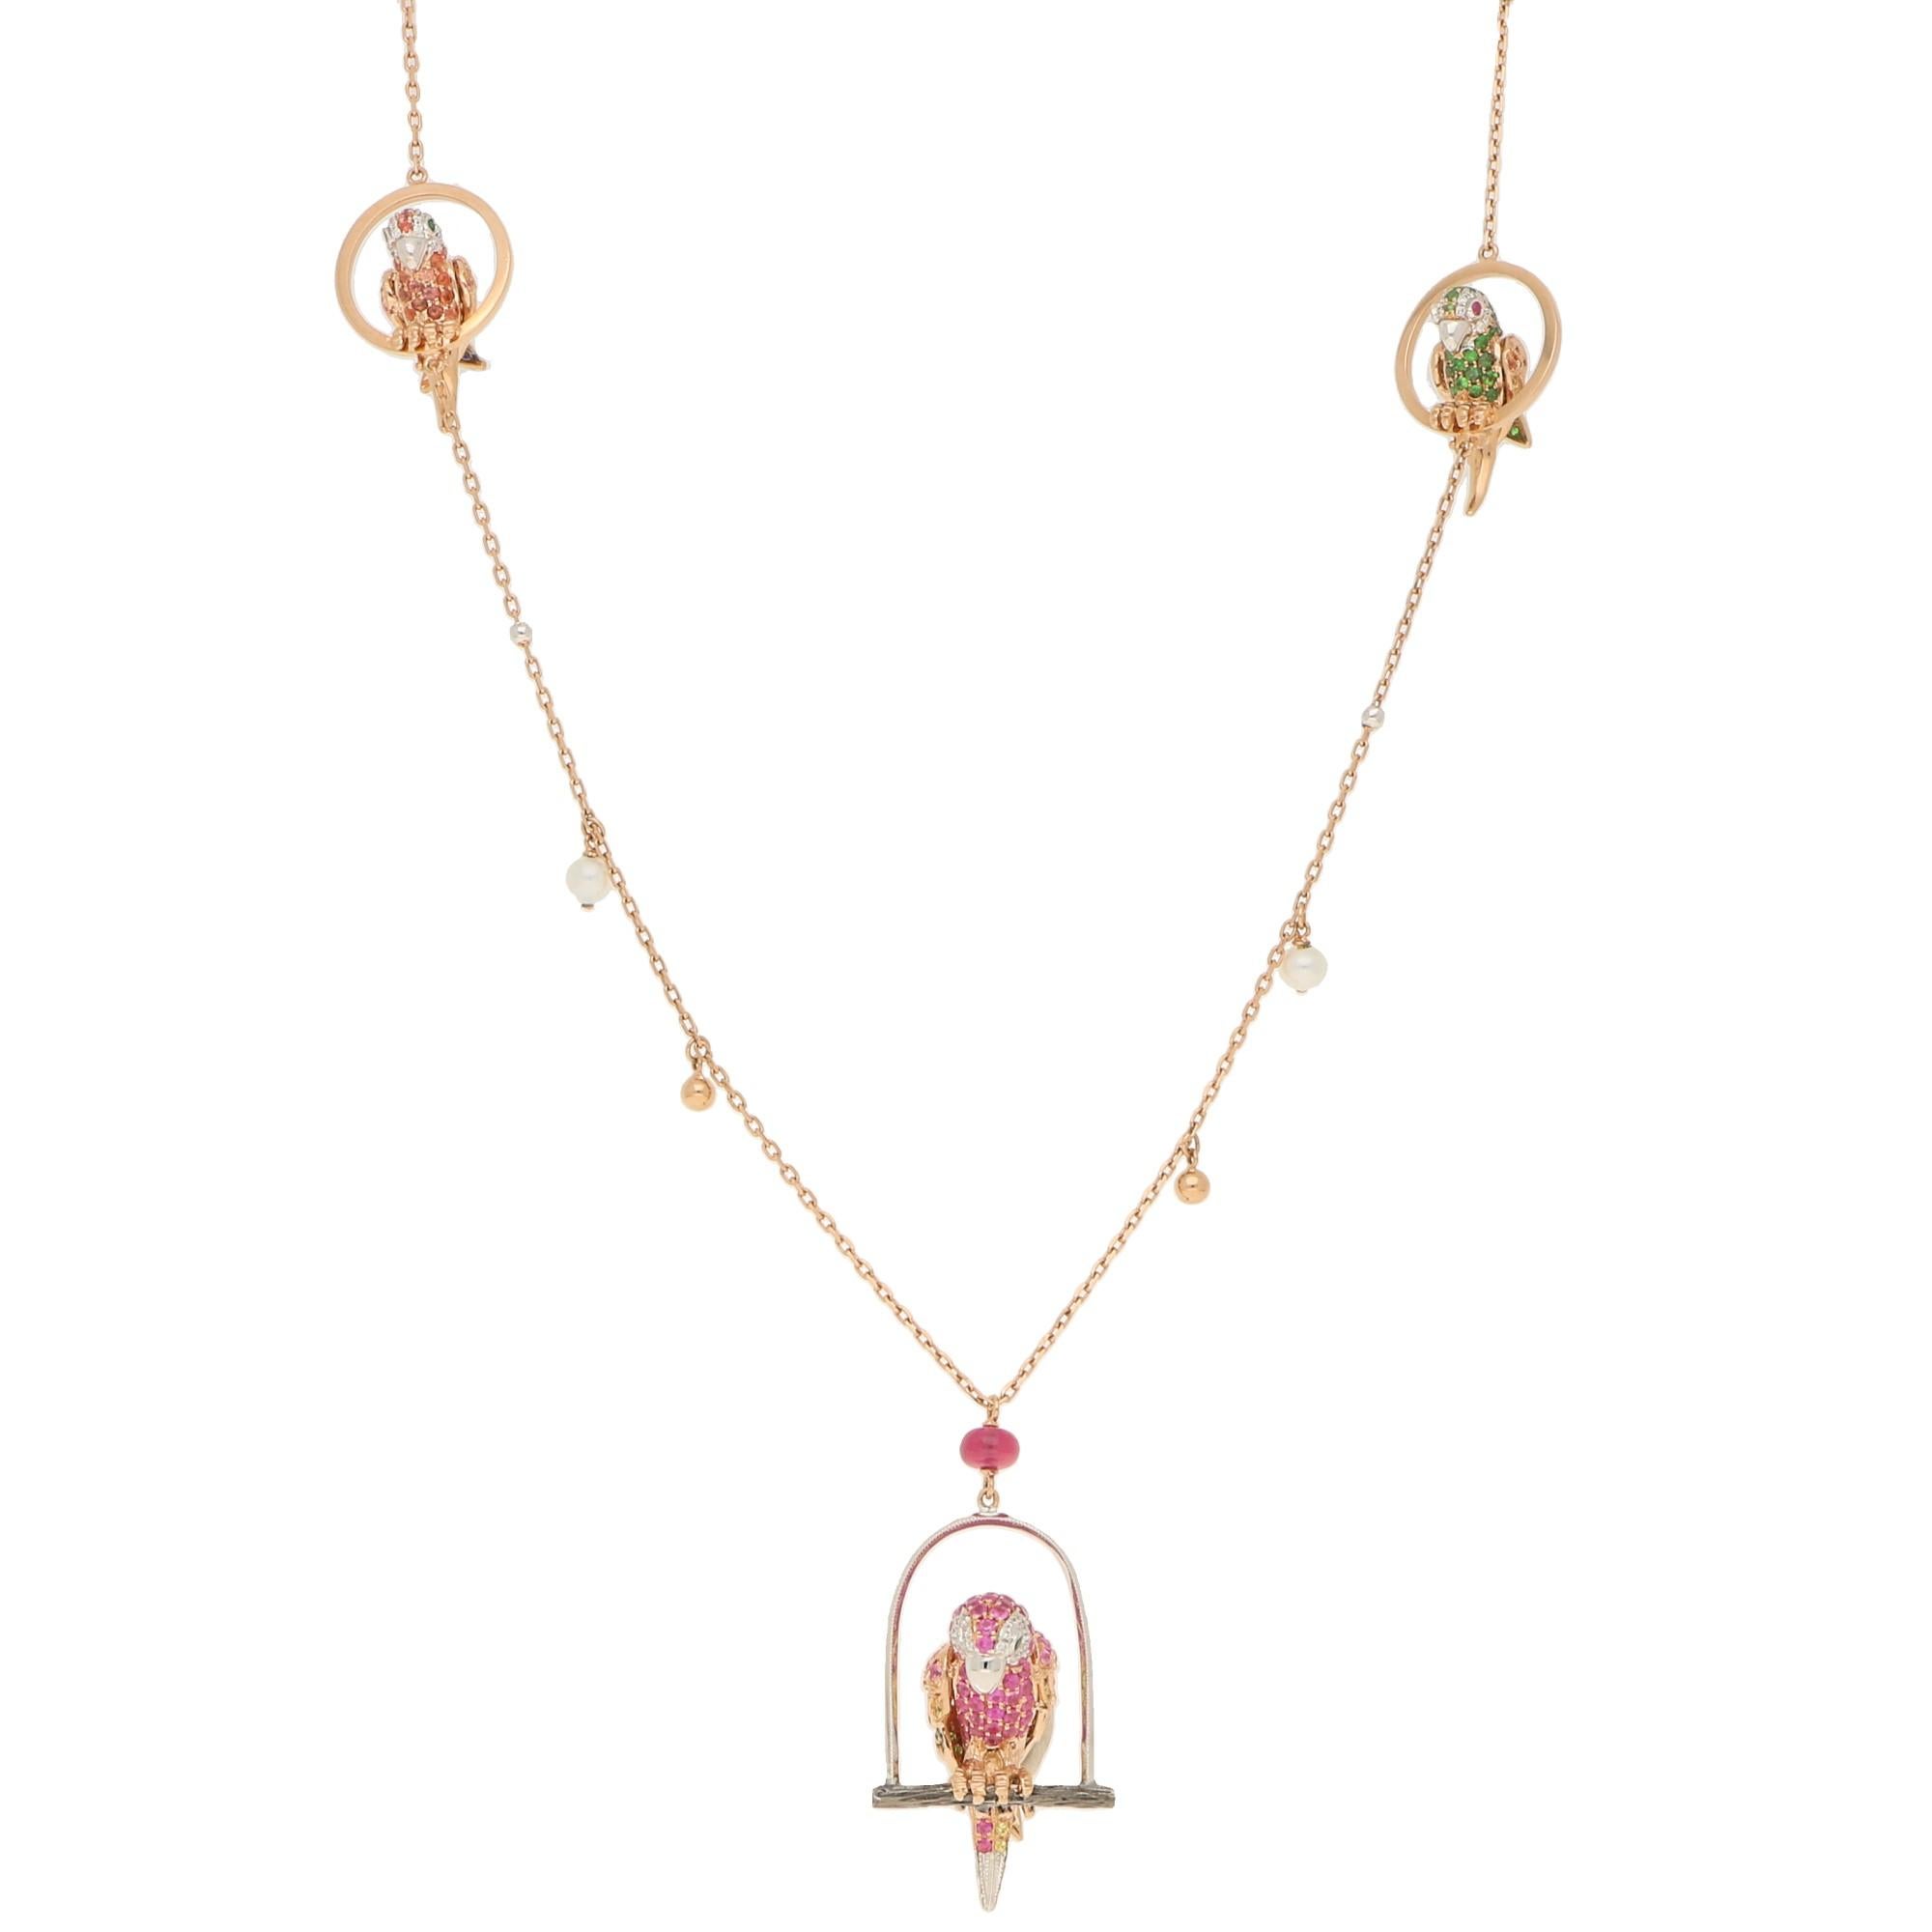 A pretty and unusual parrot necklet set on 18ct rose and white gold. The main feature parrot is perched on a white gold swing roost and is grain set with round blue, pink and yellow sapphires, tsavorite garnets and diamonds across its body, wings